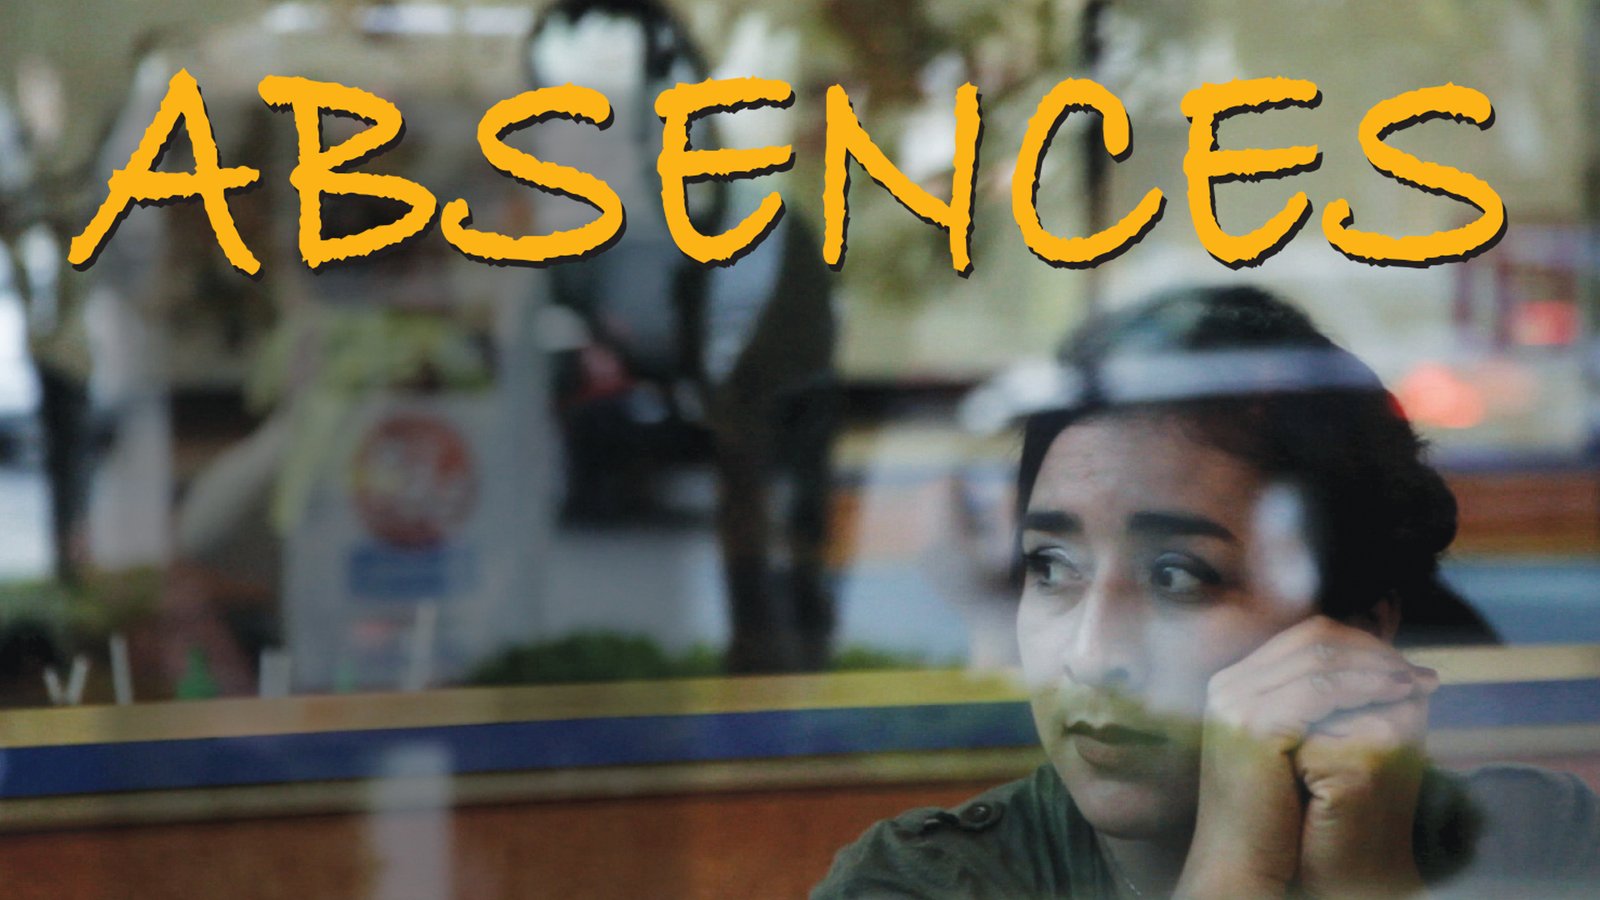 Absences - The Consequences of Disapearance in Mexico